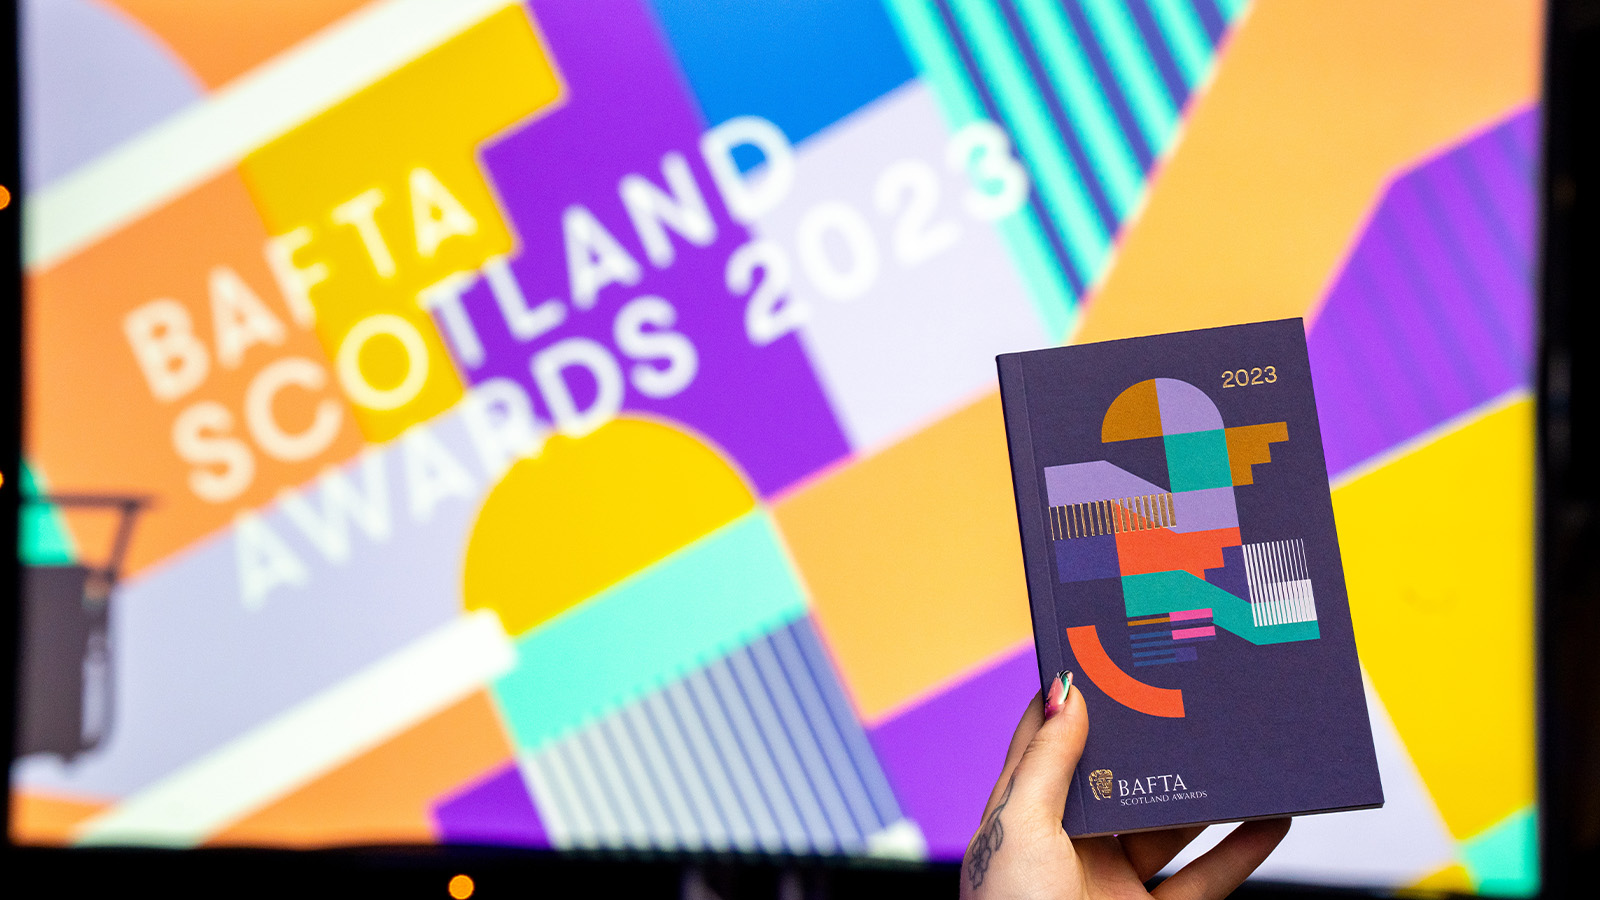 A hand holds up the print version of the BAFTA Scotland Awards 2023 programme in front of a general view of preparations ahead of the 2023 BAFTA Scotland Awards held at the DoubleTree by Hilton Glasgow Central on November 19, 2023 in Glasgow, Scotland. (Photo by John Clark/BAFTA via Getty Images)